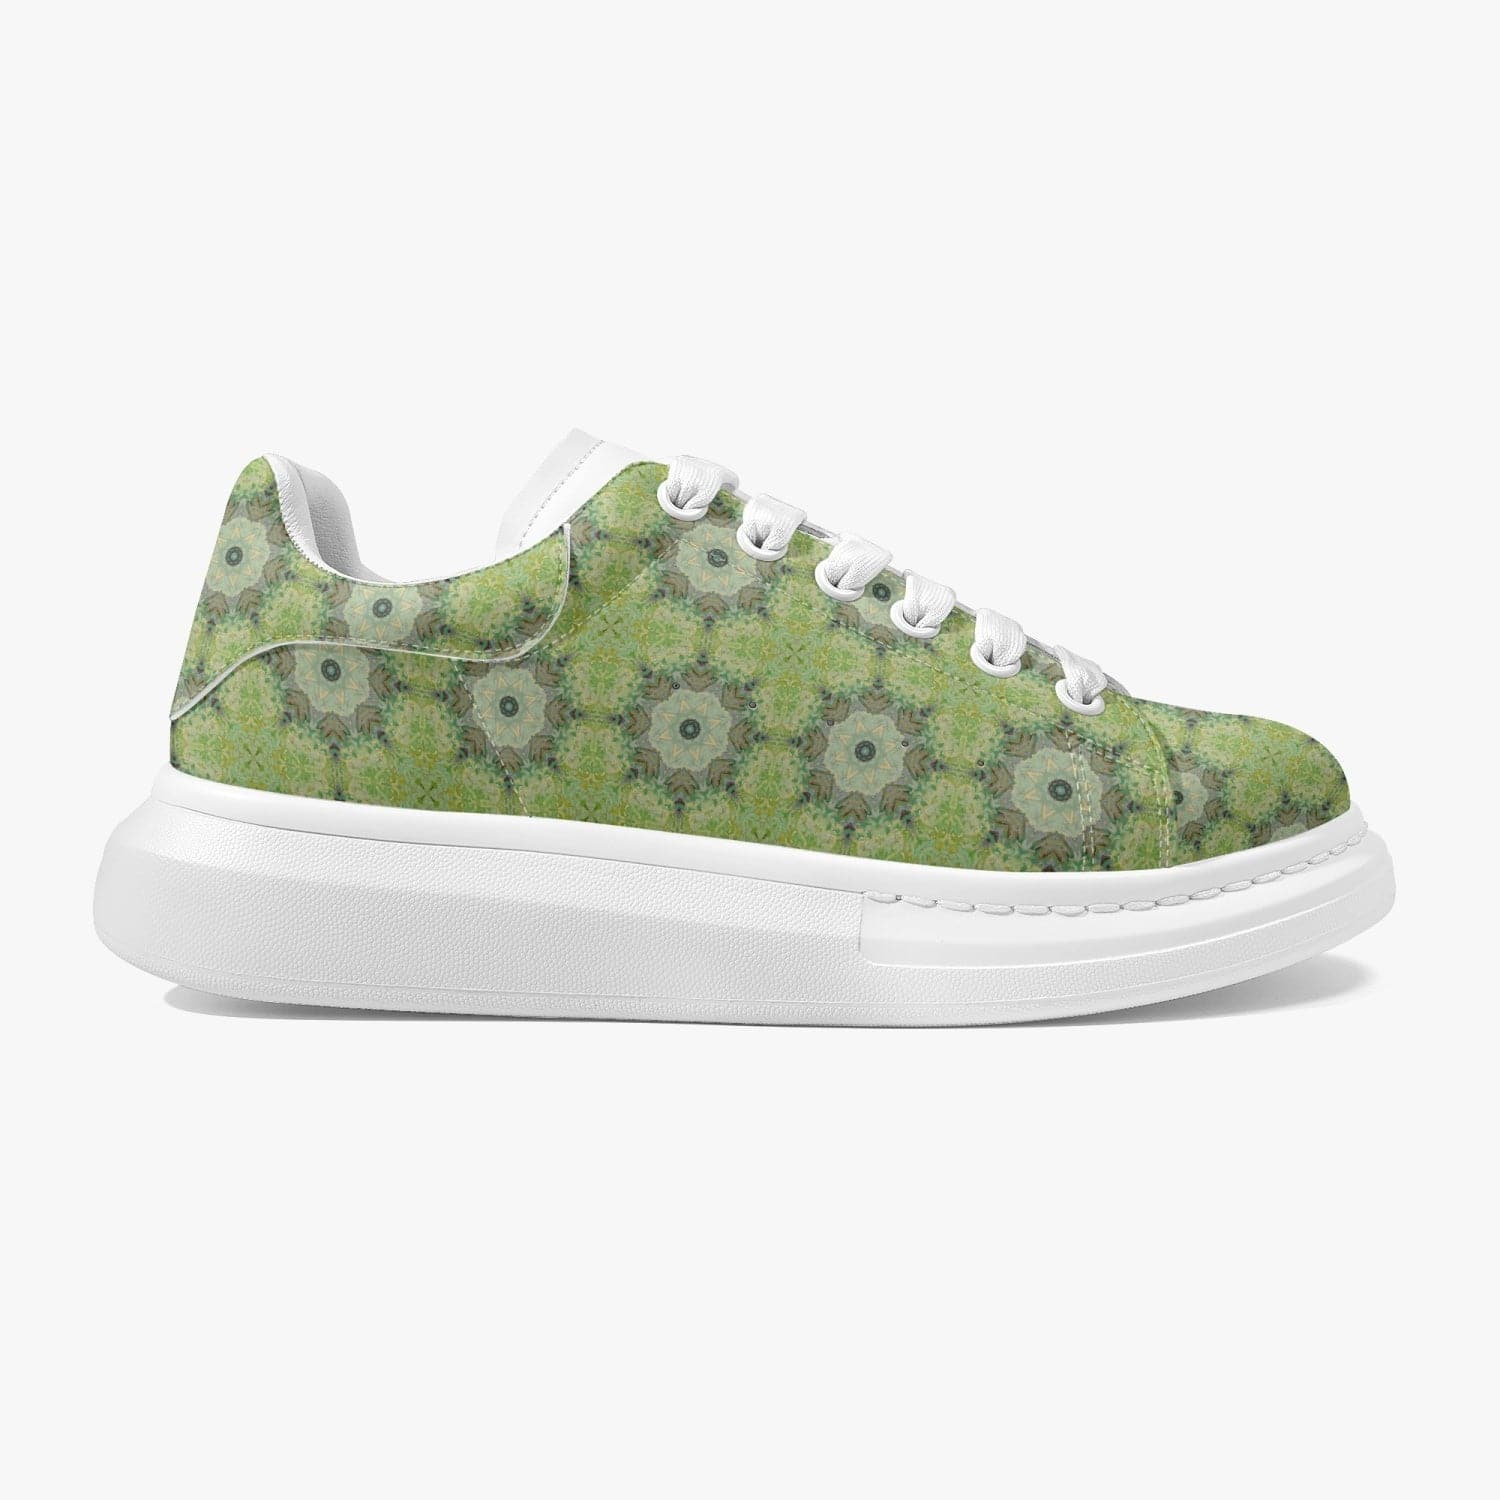 Spring green and beige starry pattern, trendy 2022  Lifestyle Low-Top Leather Sneakers, by Sensus Studio Design